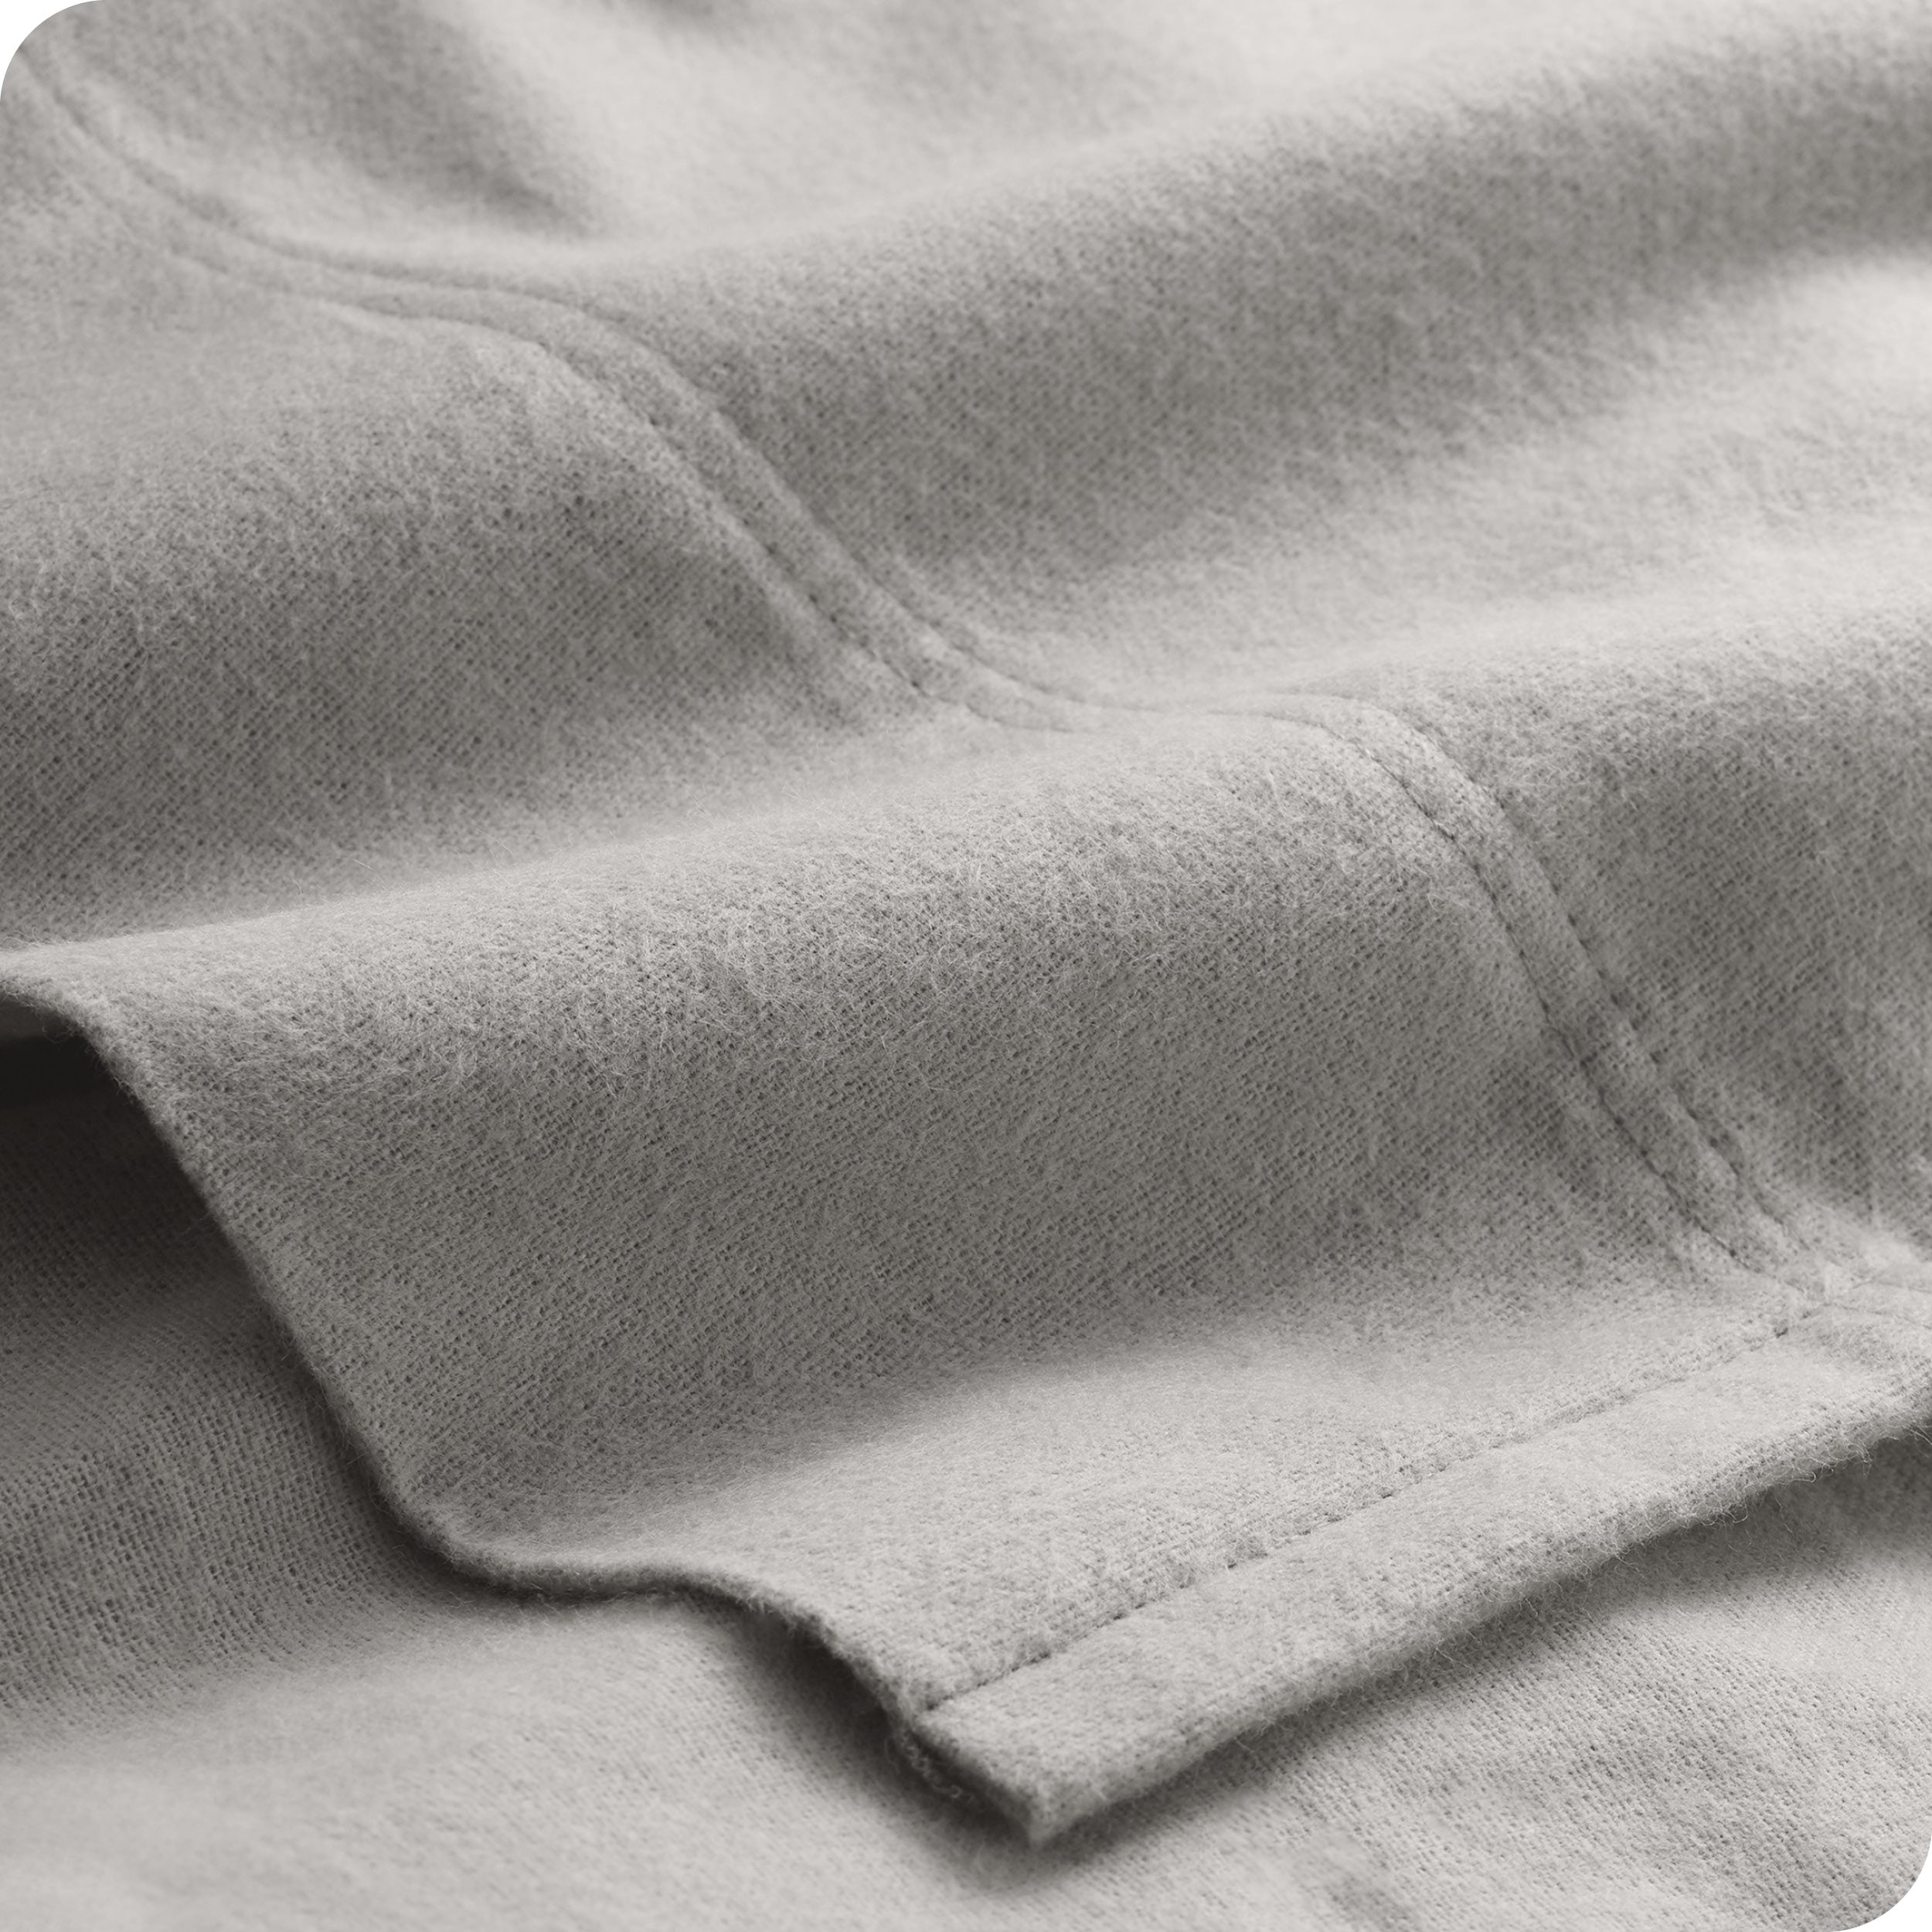 A close view of the flat top sheet showing the texture and stitching